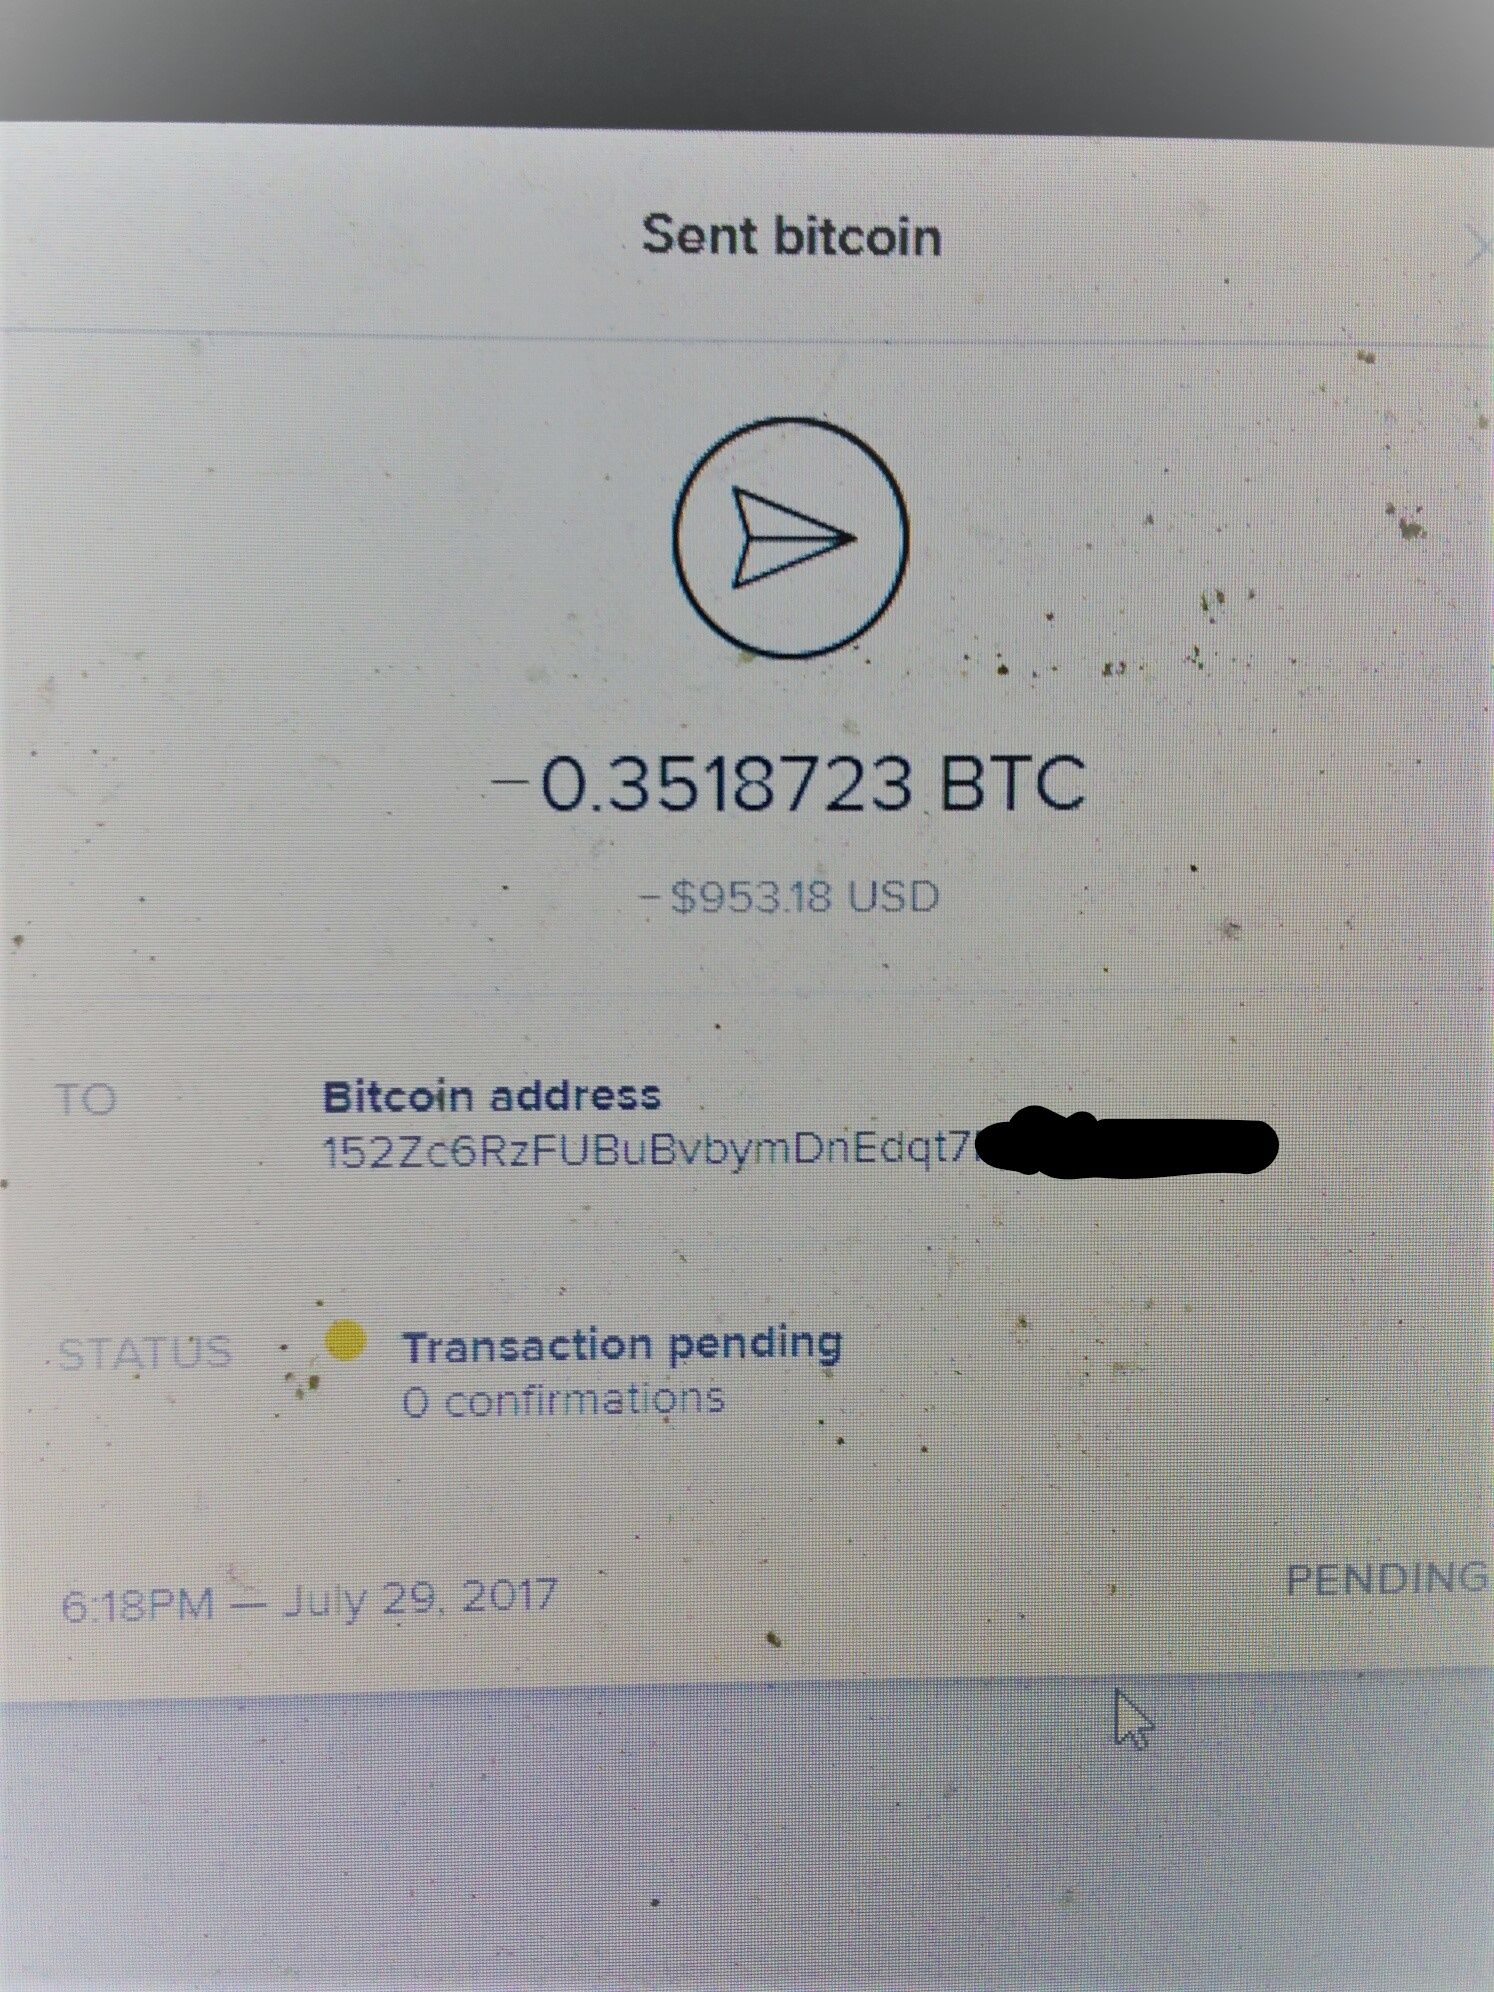 Why is my crypto withdrawal pending? | Revolut United Kingdom